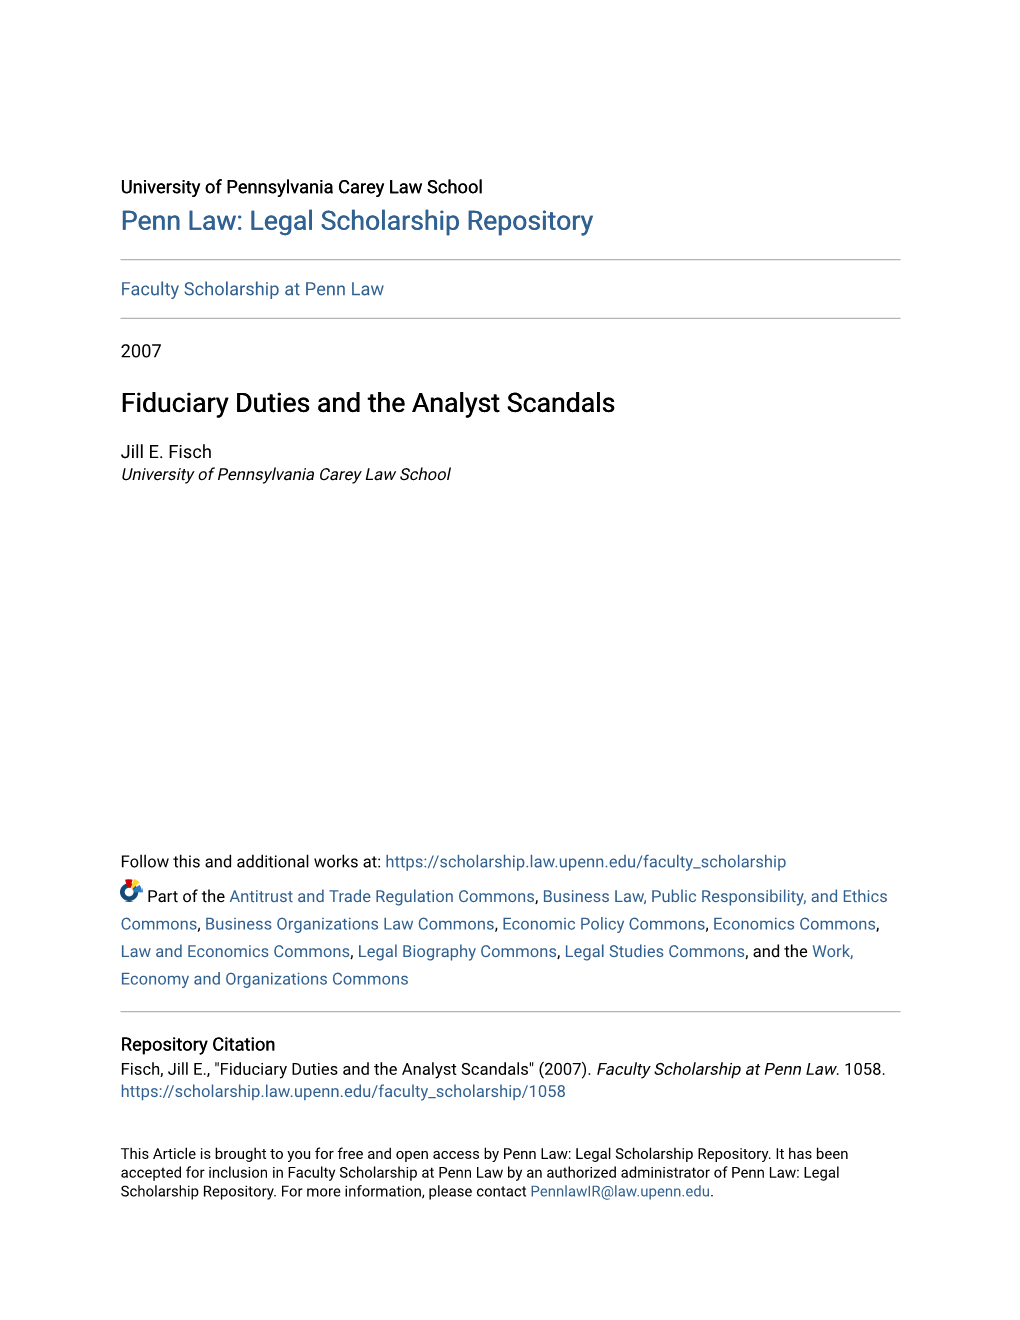 Fiduciary Duties and the Analyst Scandals